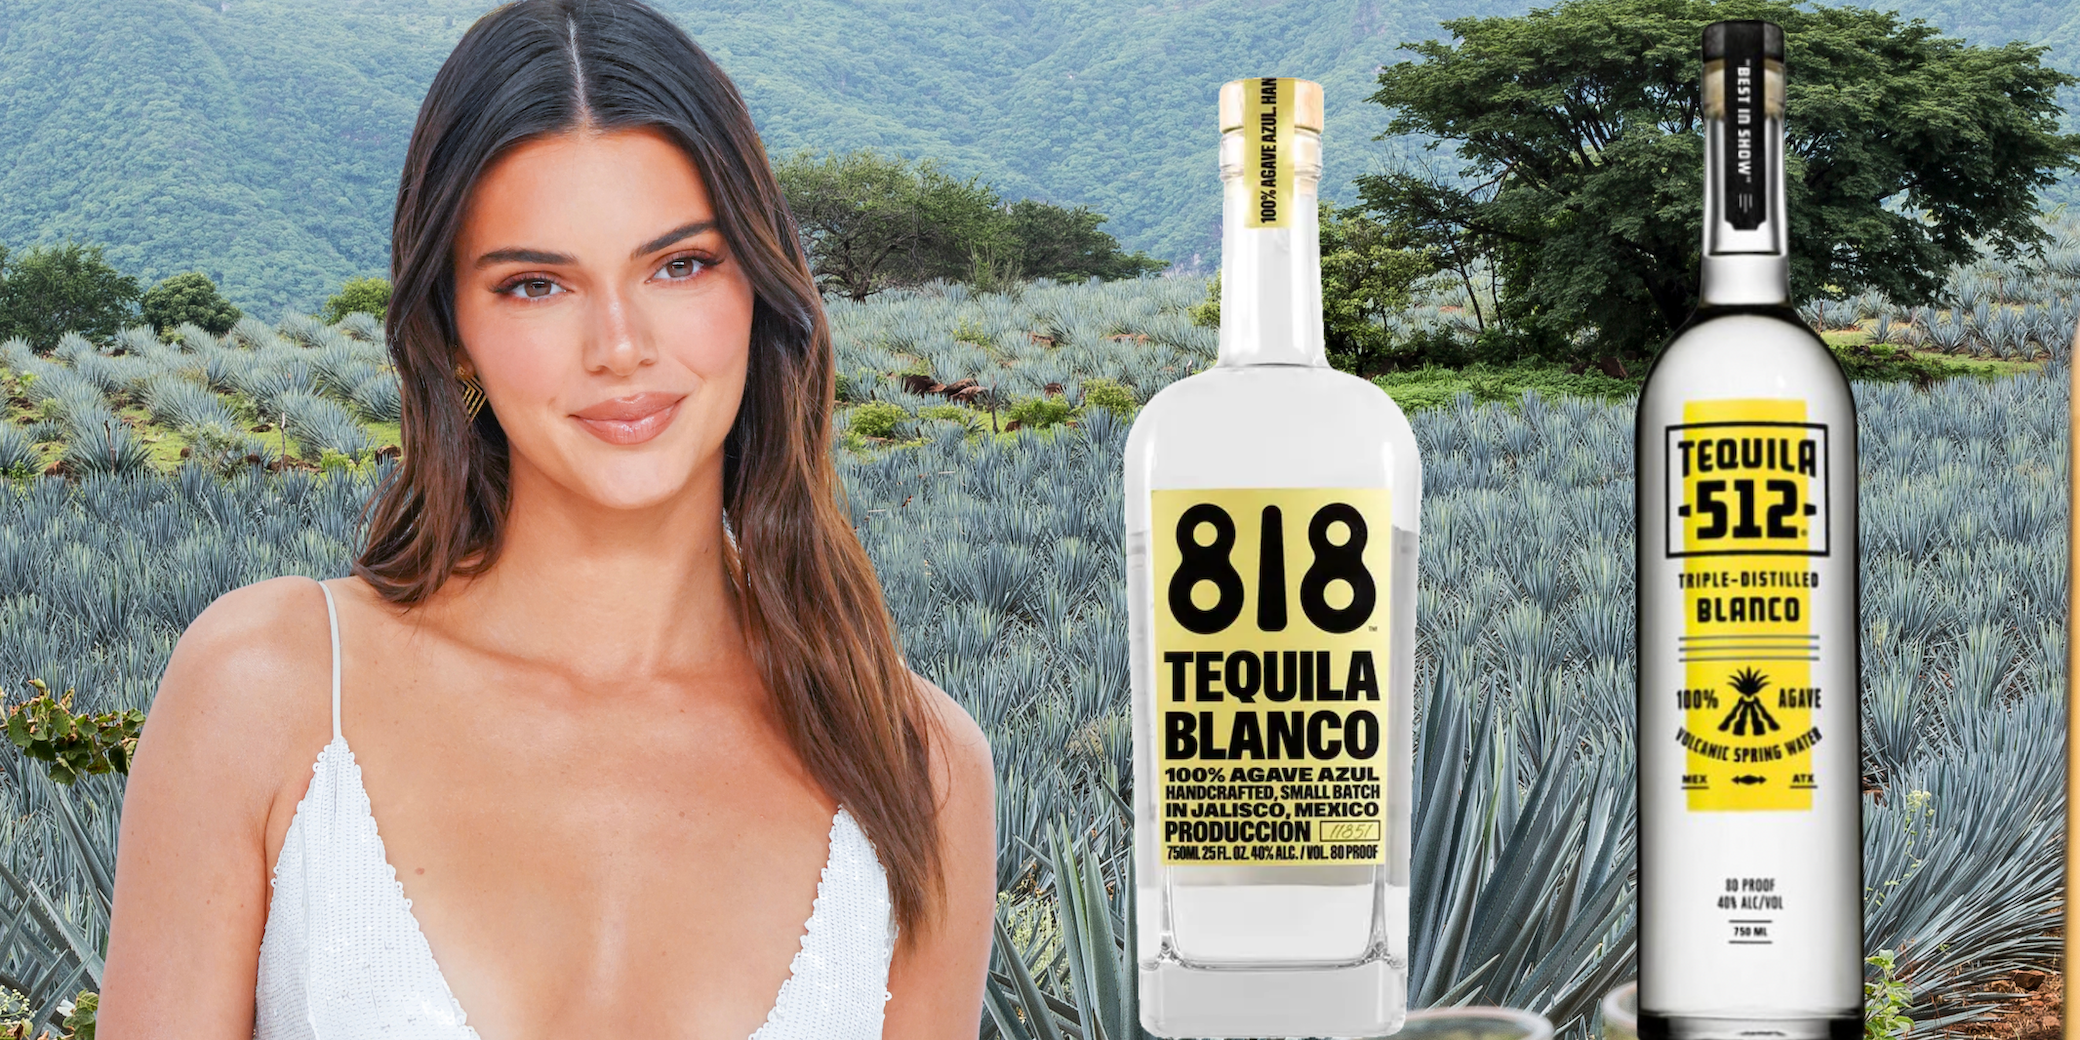 Kendall Jenner accused of  “simply and blatantly” ripping off Tequila 512's Brand.